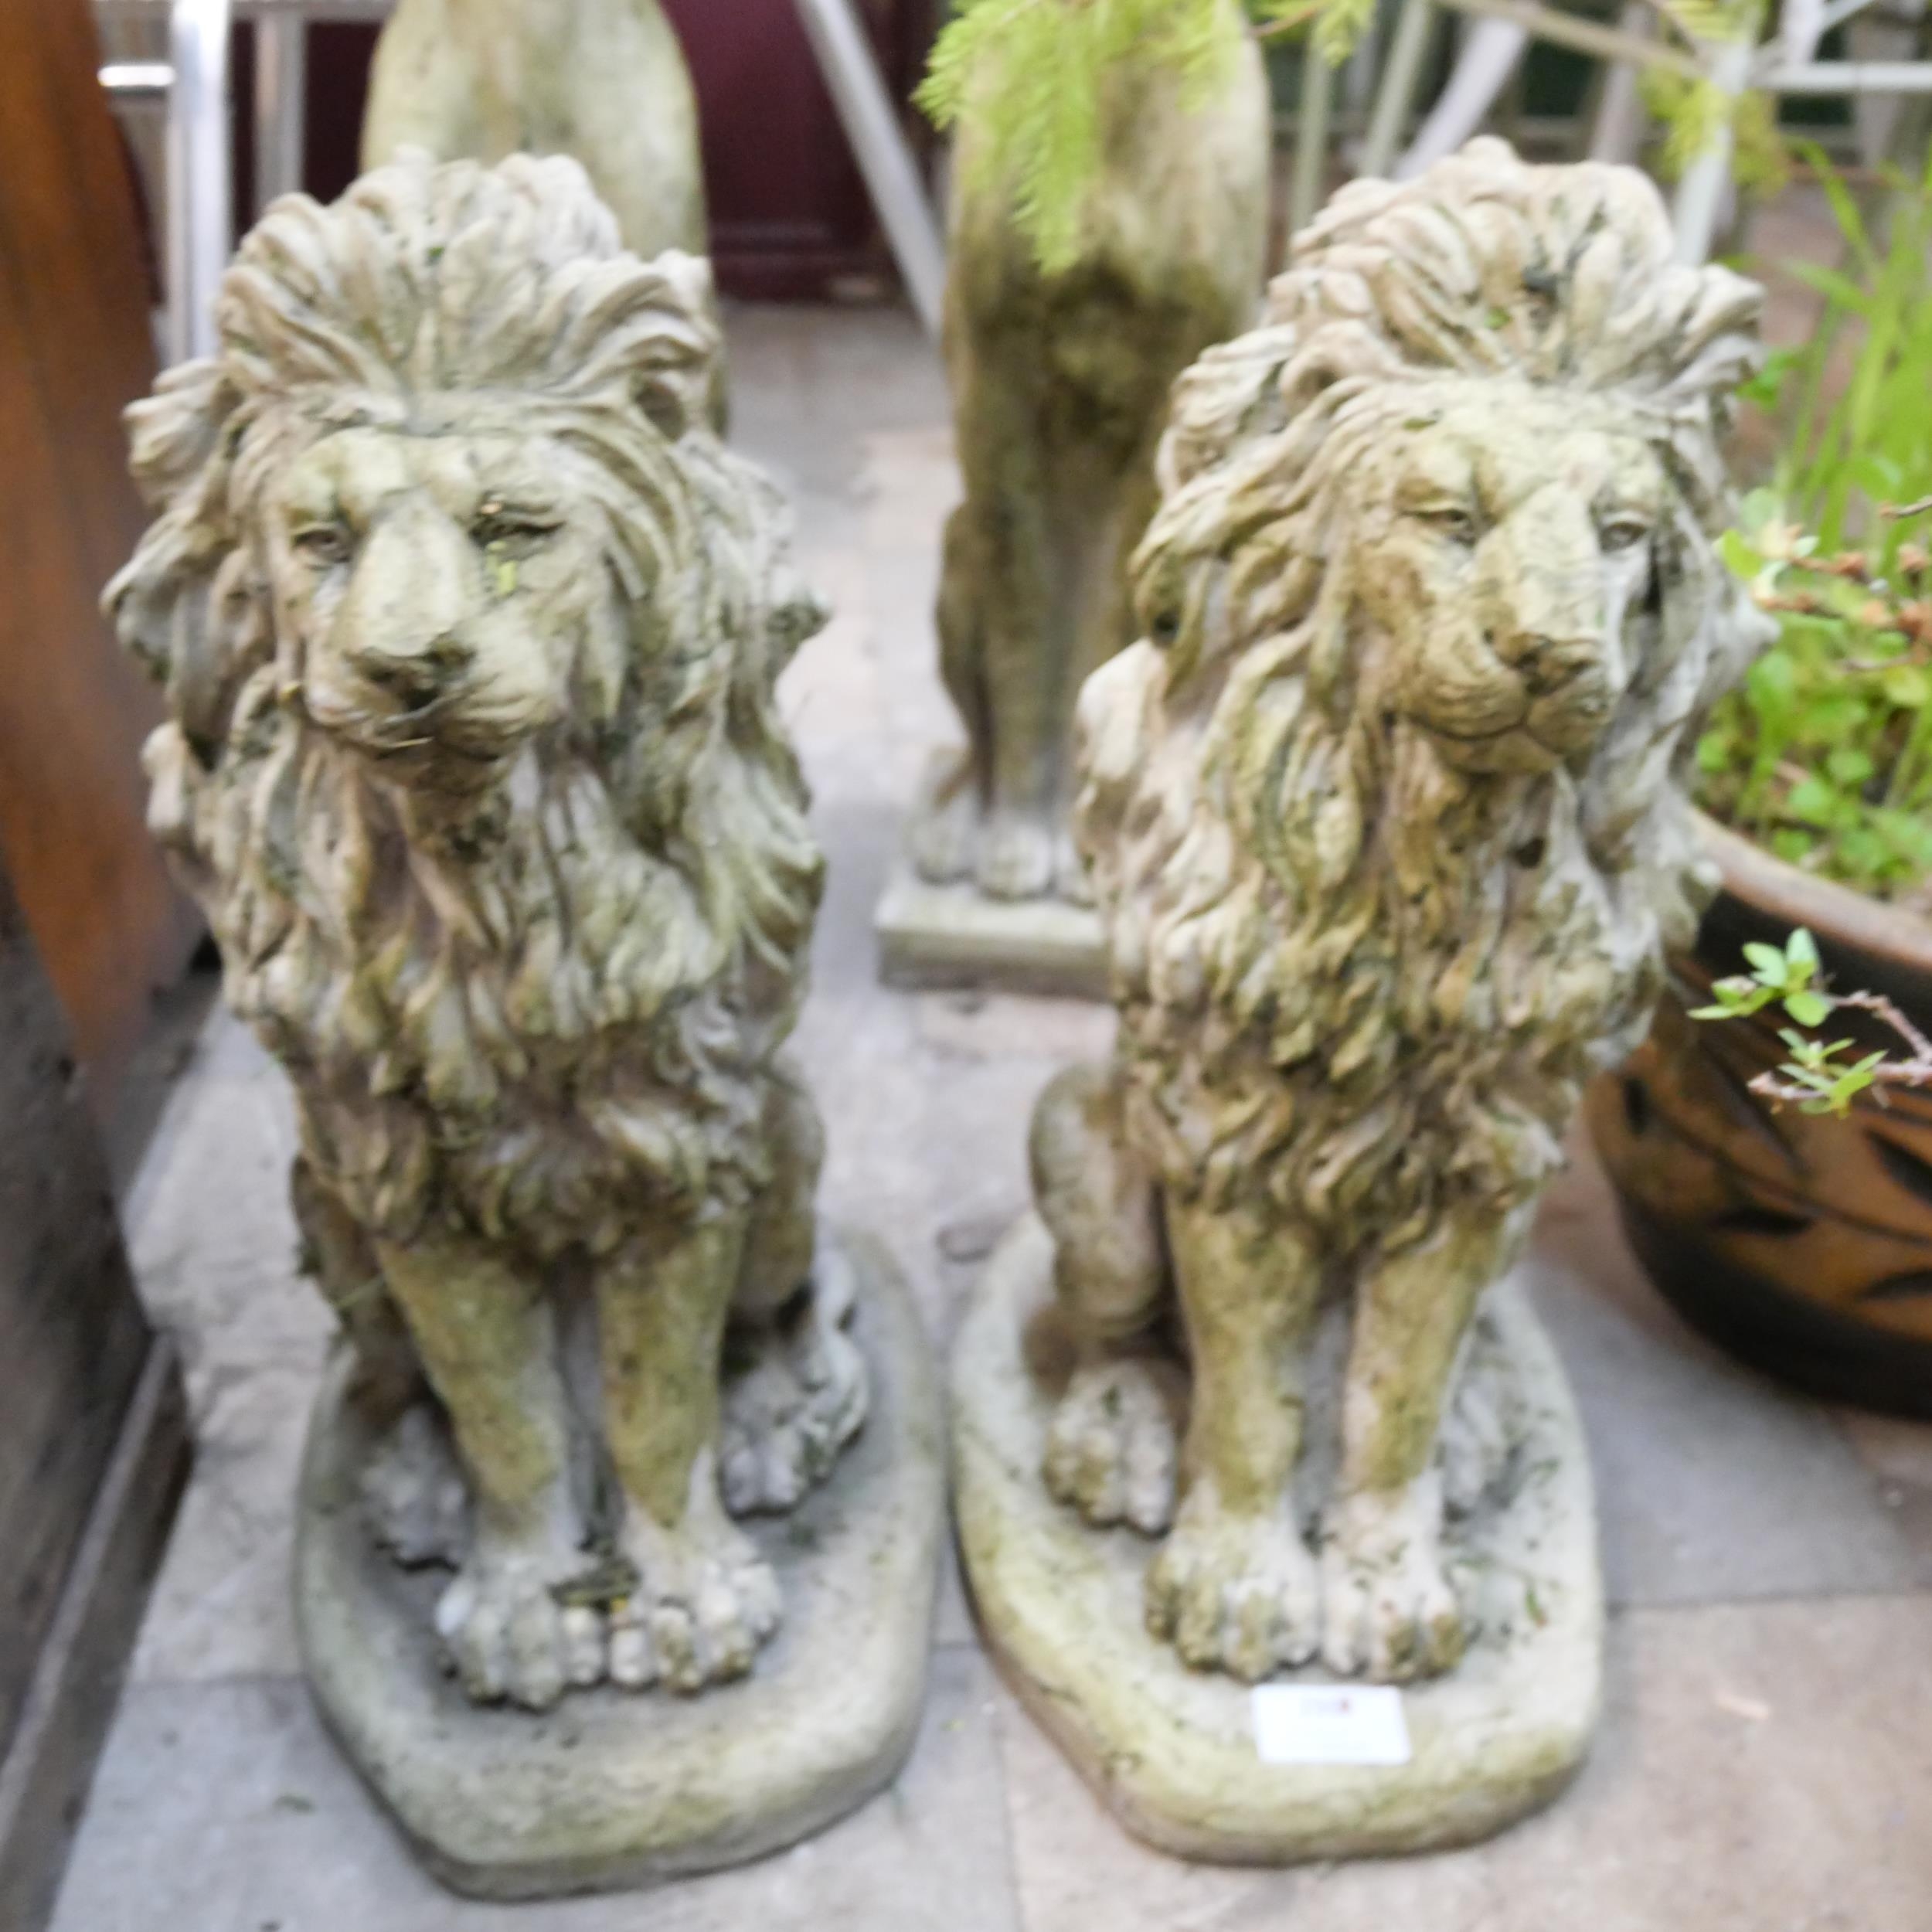 A pair of concrete garden figures of seated concrete lions